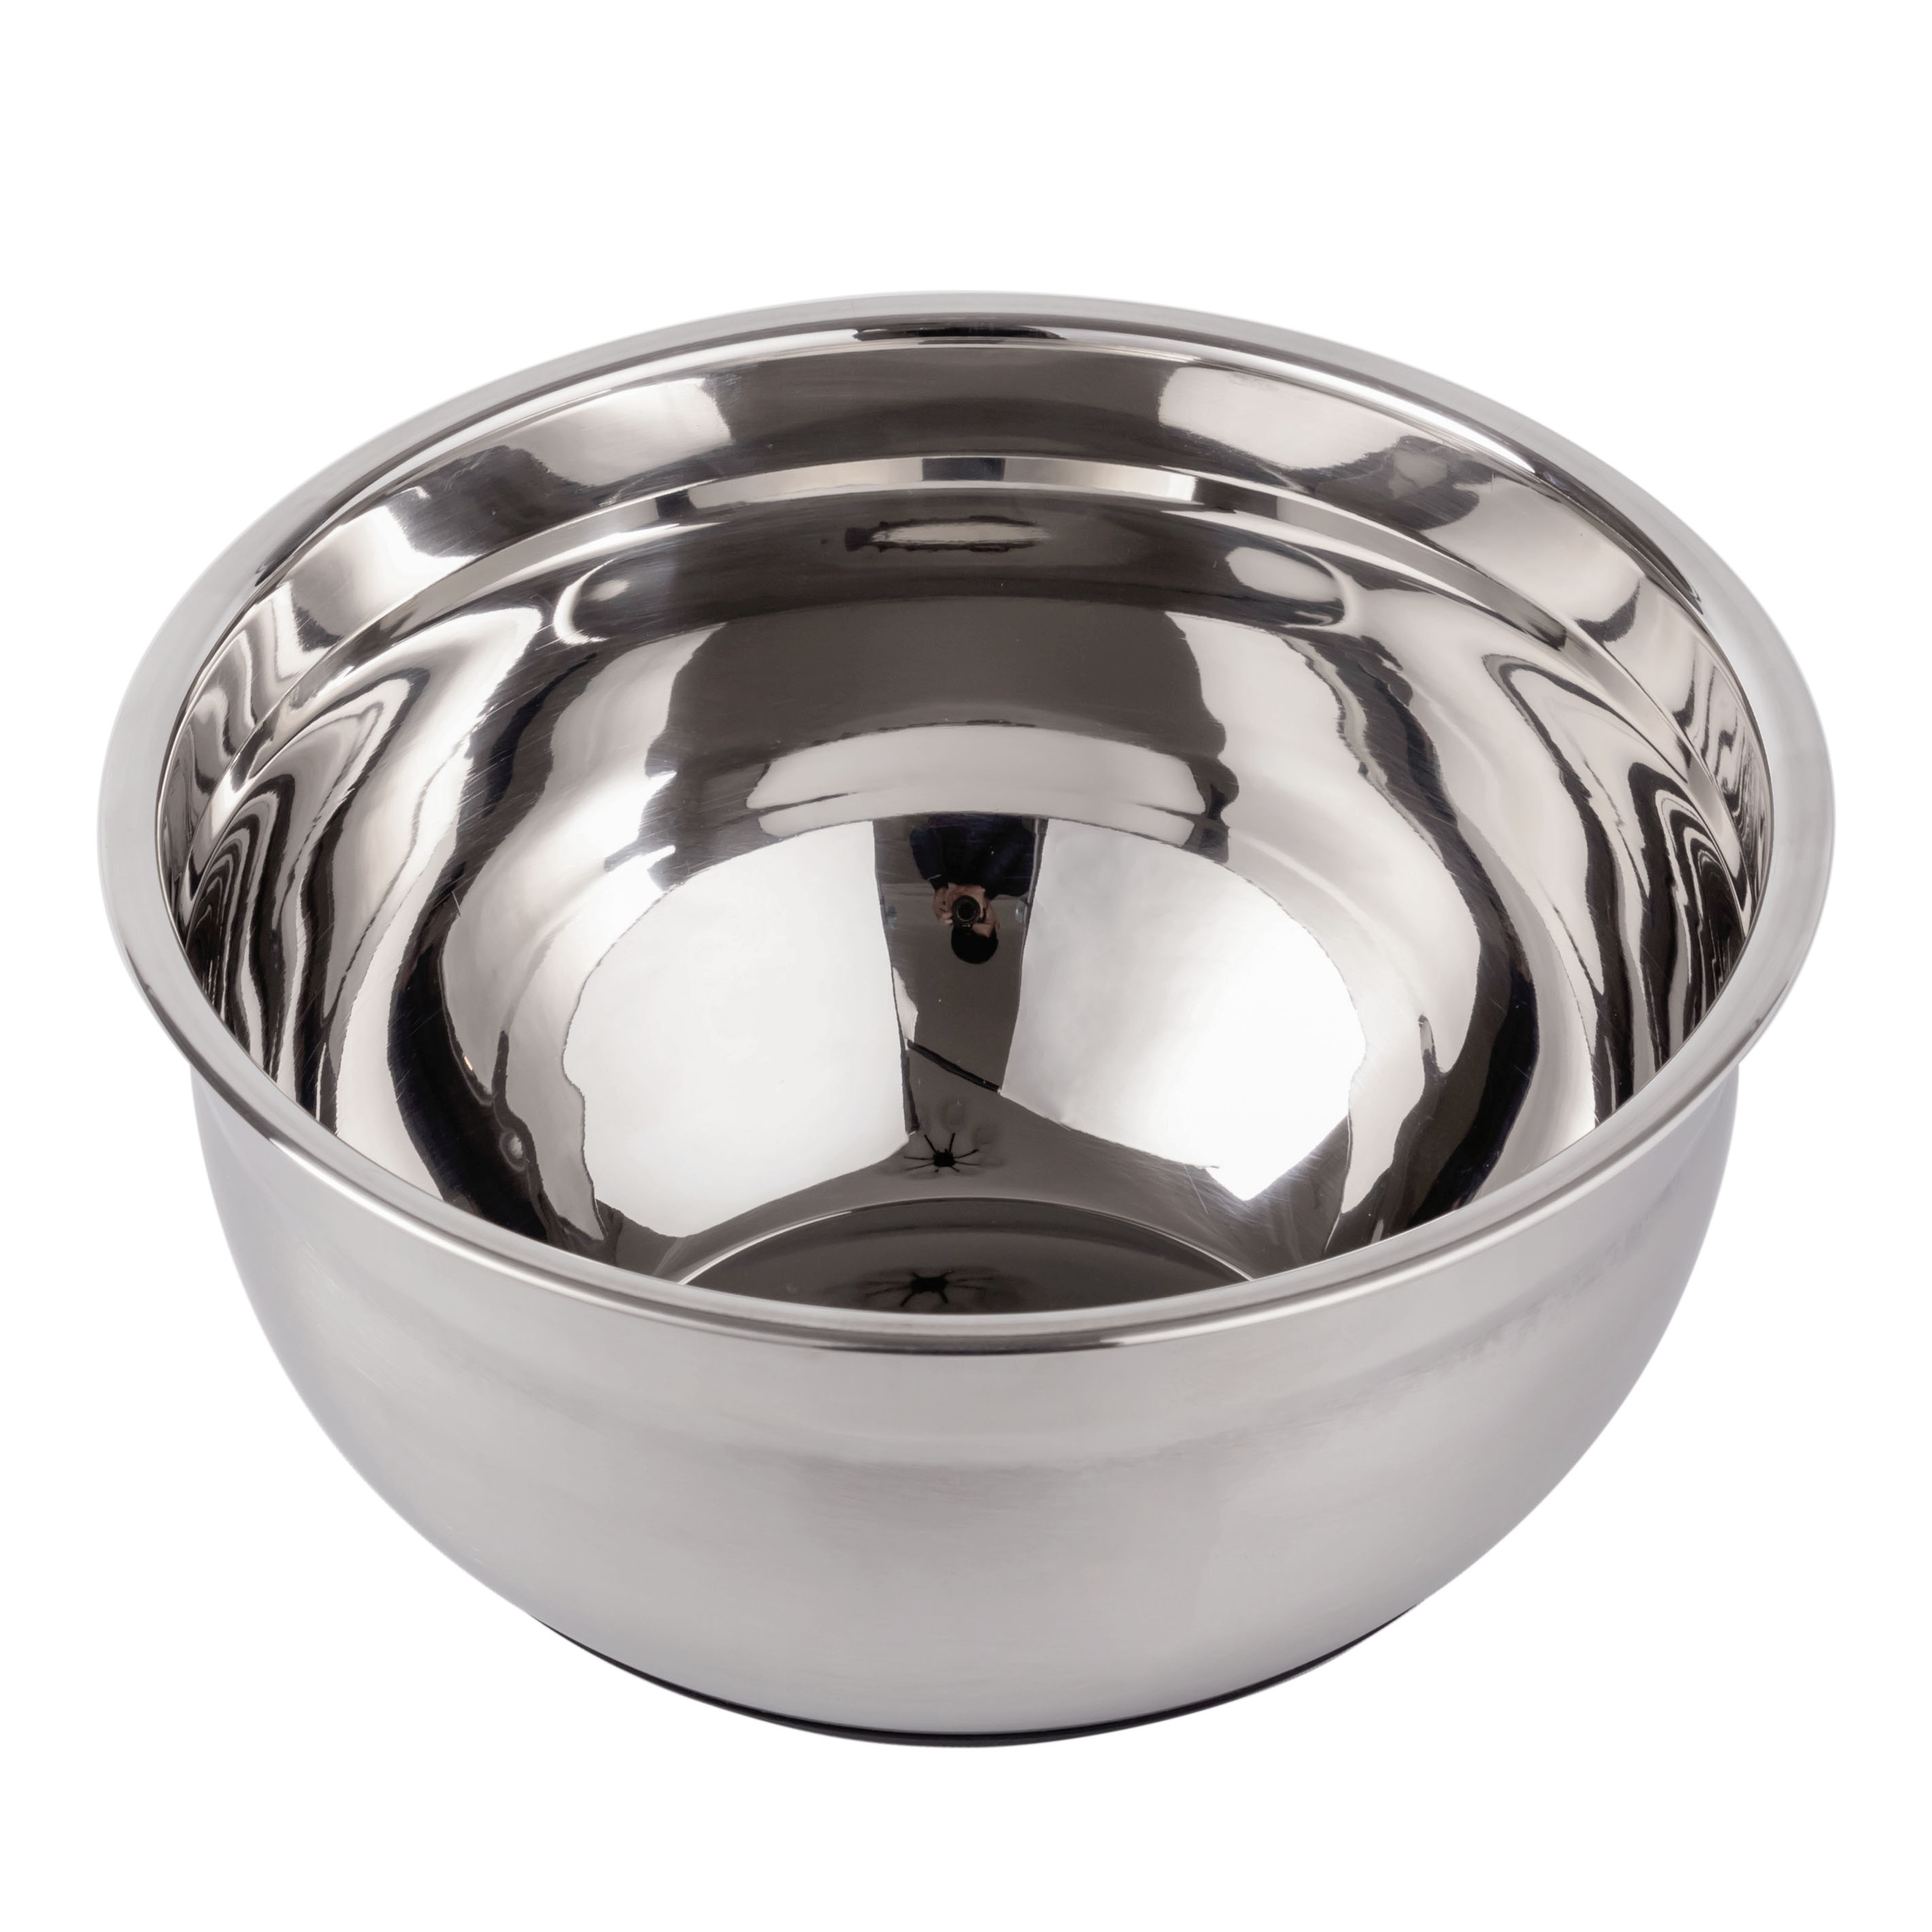 YUTAI 304 stainless steel non-slip mixing bowl with cover and silicone bottom 2